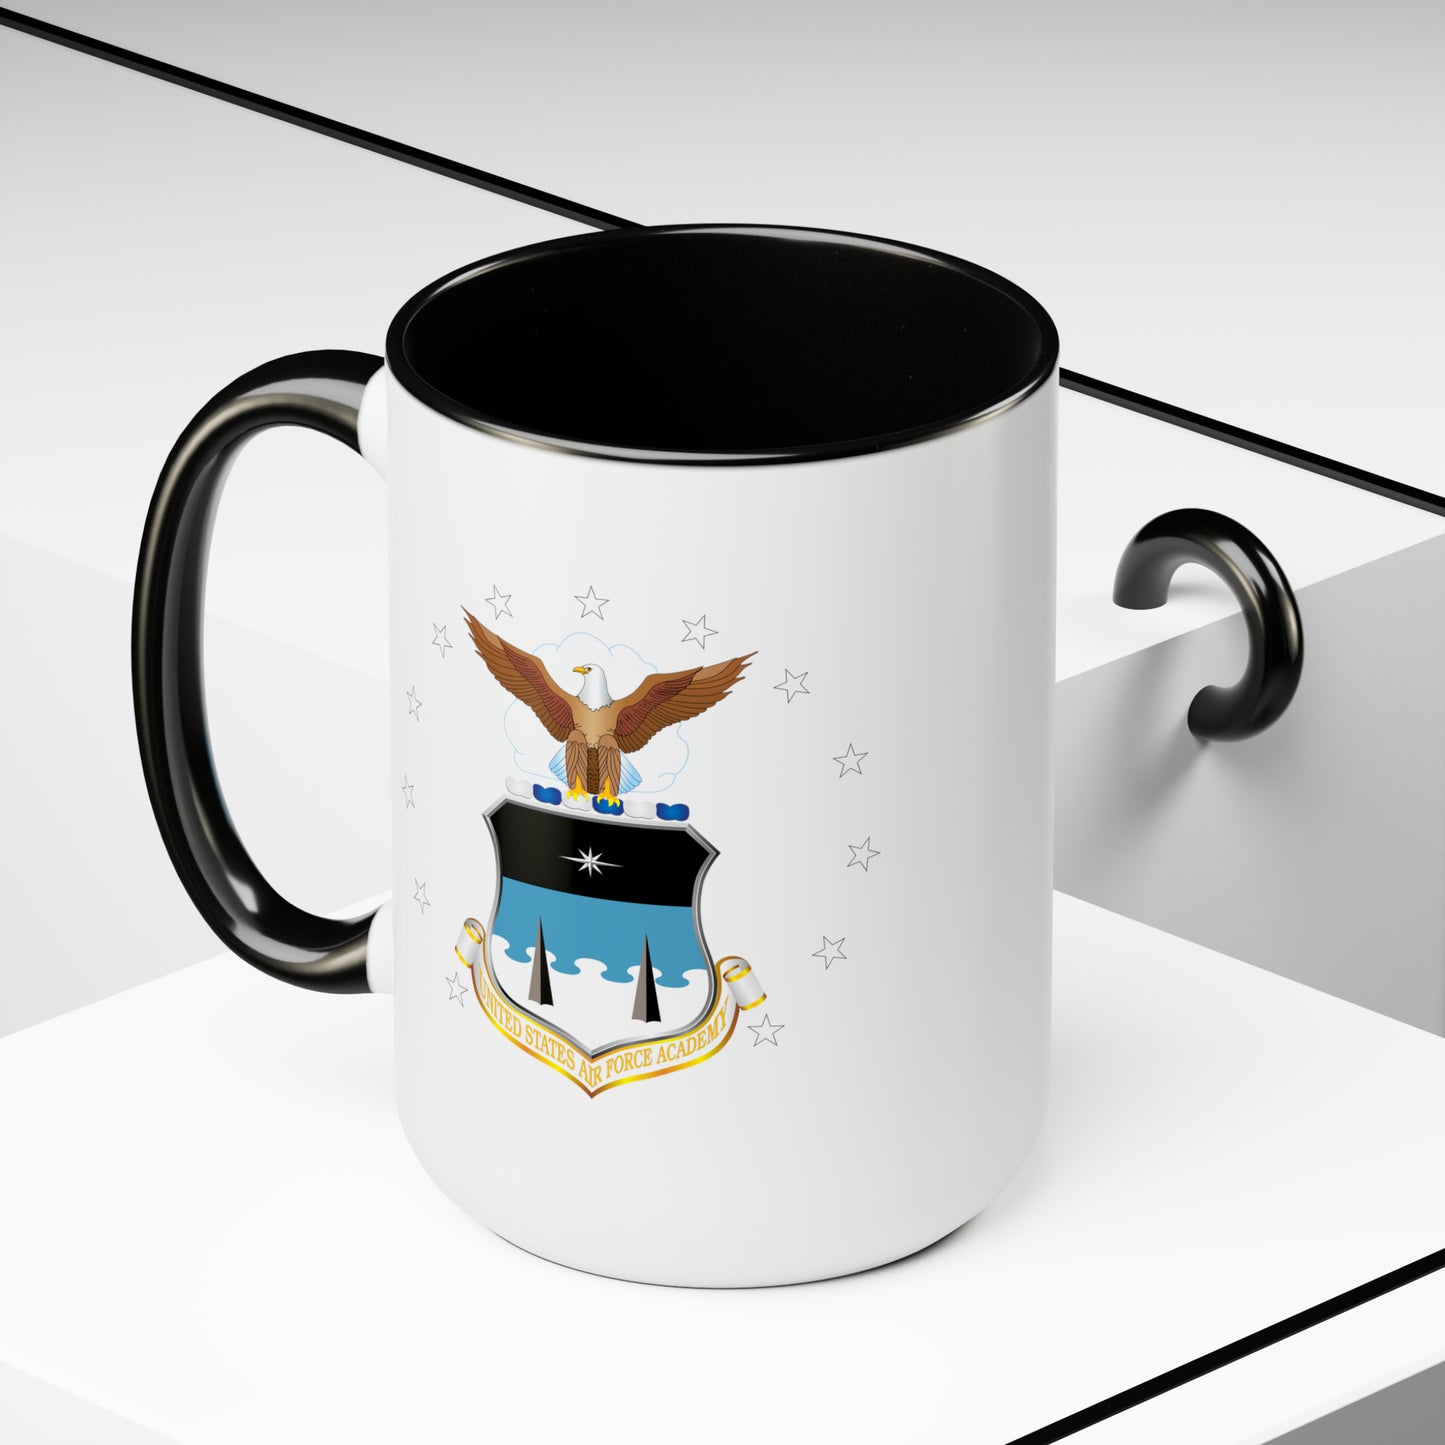 US Air Force Academy Coffee Mug - Double Sided Black Accent White Ceramic 15oz by TheGlassyLass.com